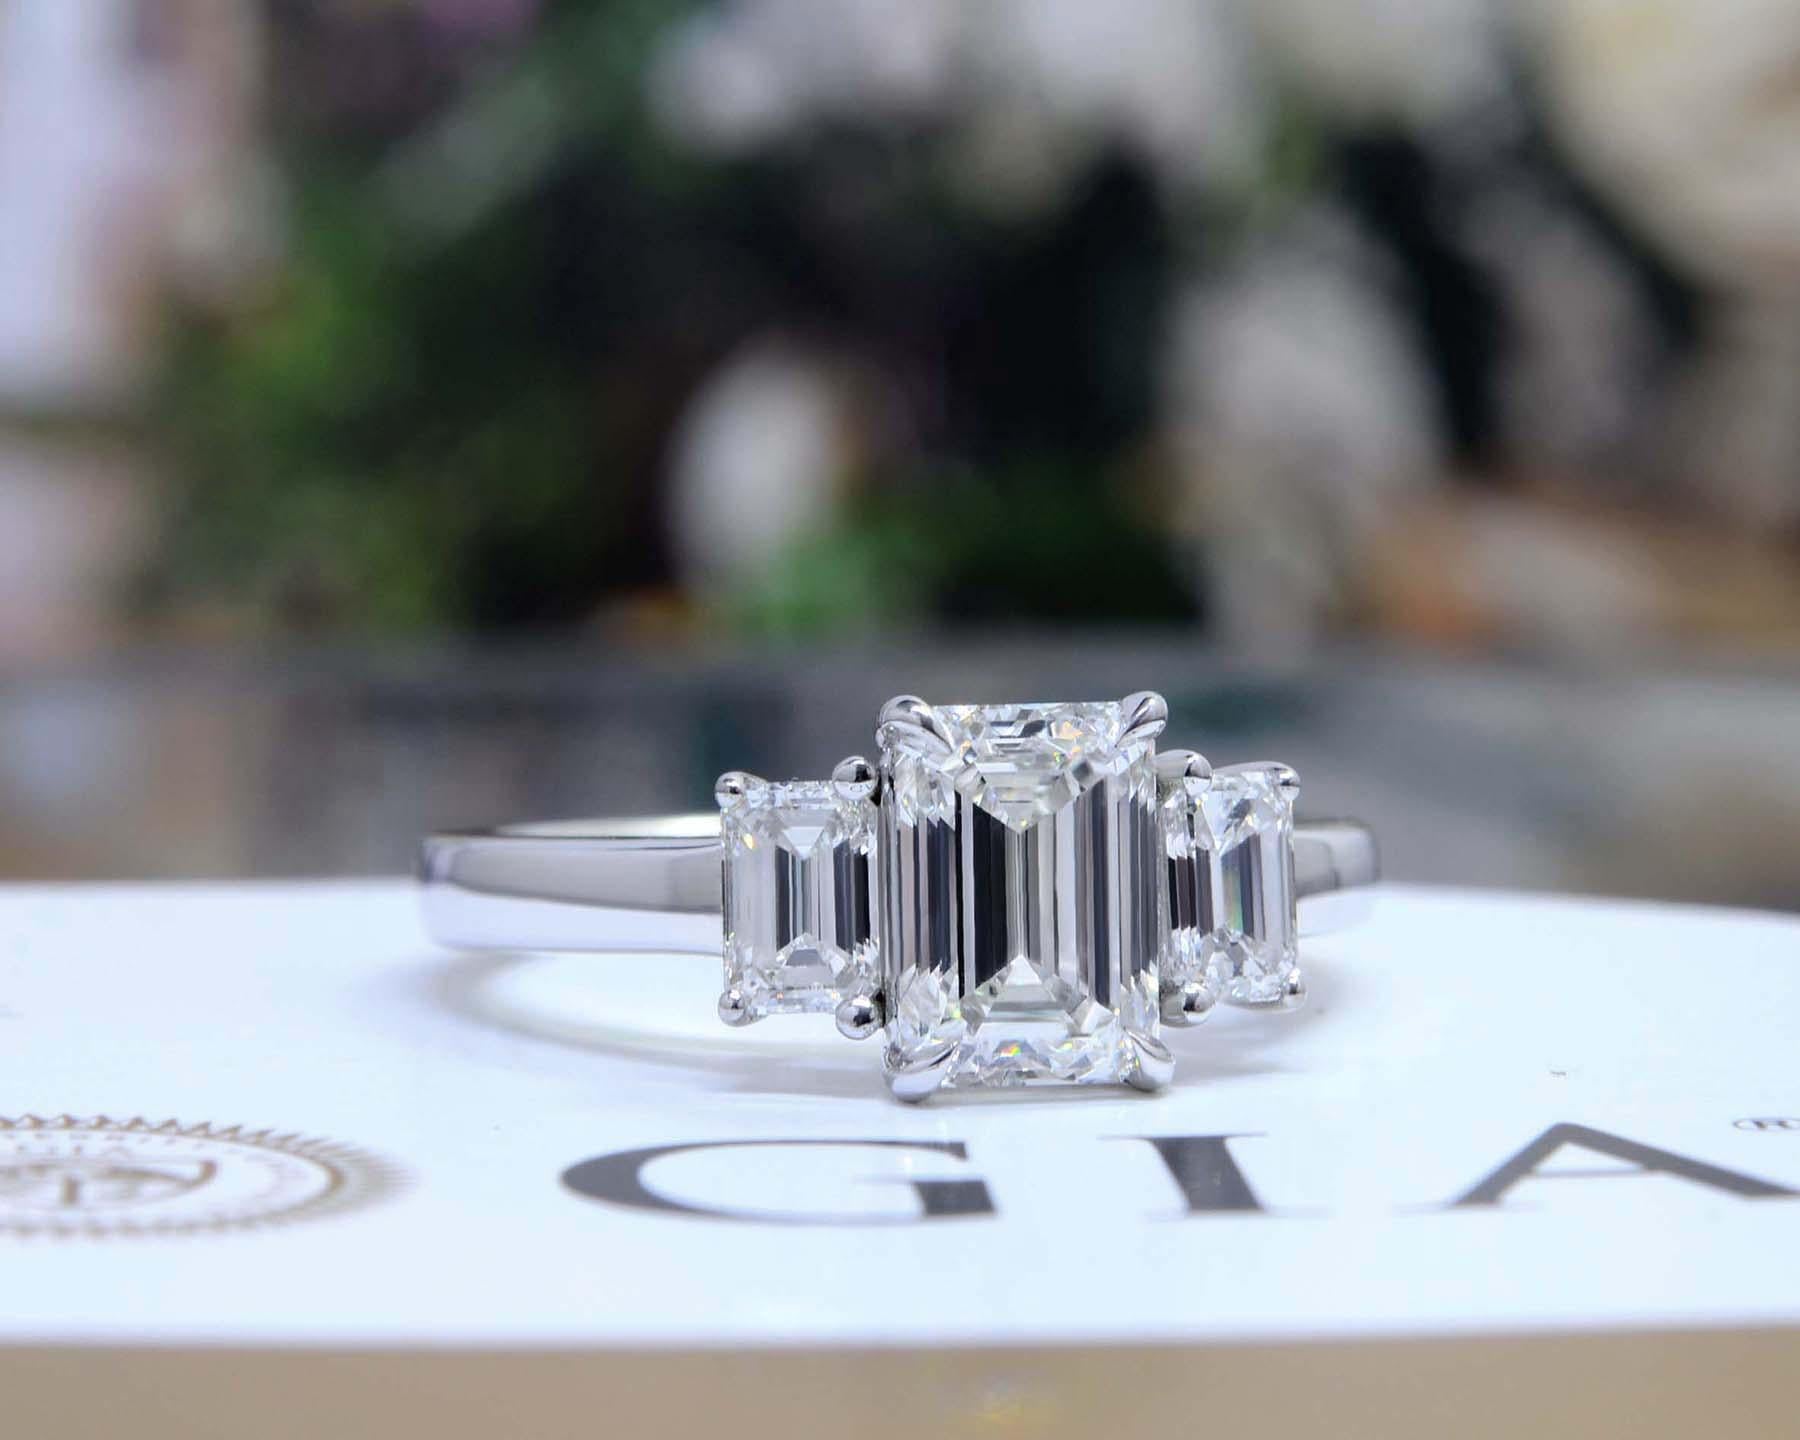 The tradition of the three stone diamond ring lives on in this exquisite engagement ring. At the center of this wonderful piece is poised a sparkling emerald cut diamond with a weight of 1.50 carats. This diamond has a clarity of Vvs1 and a color